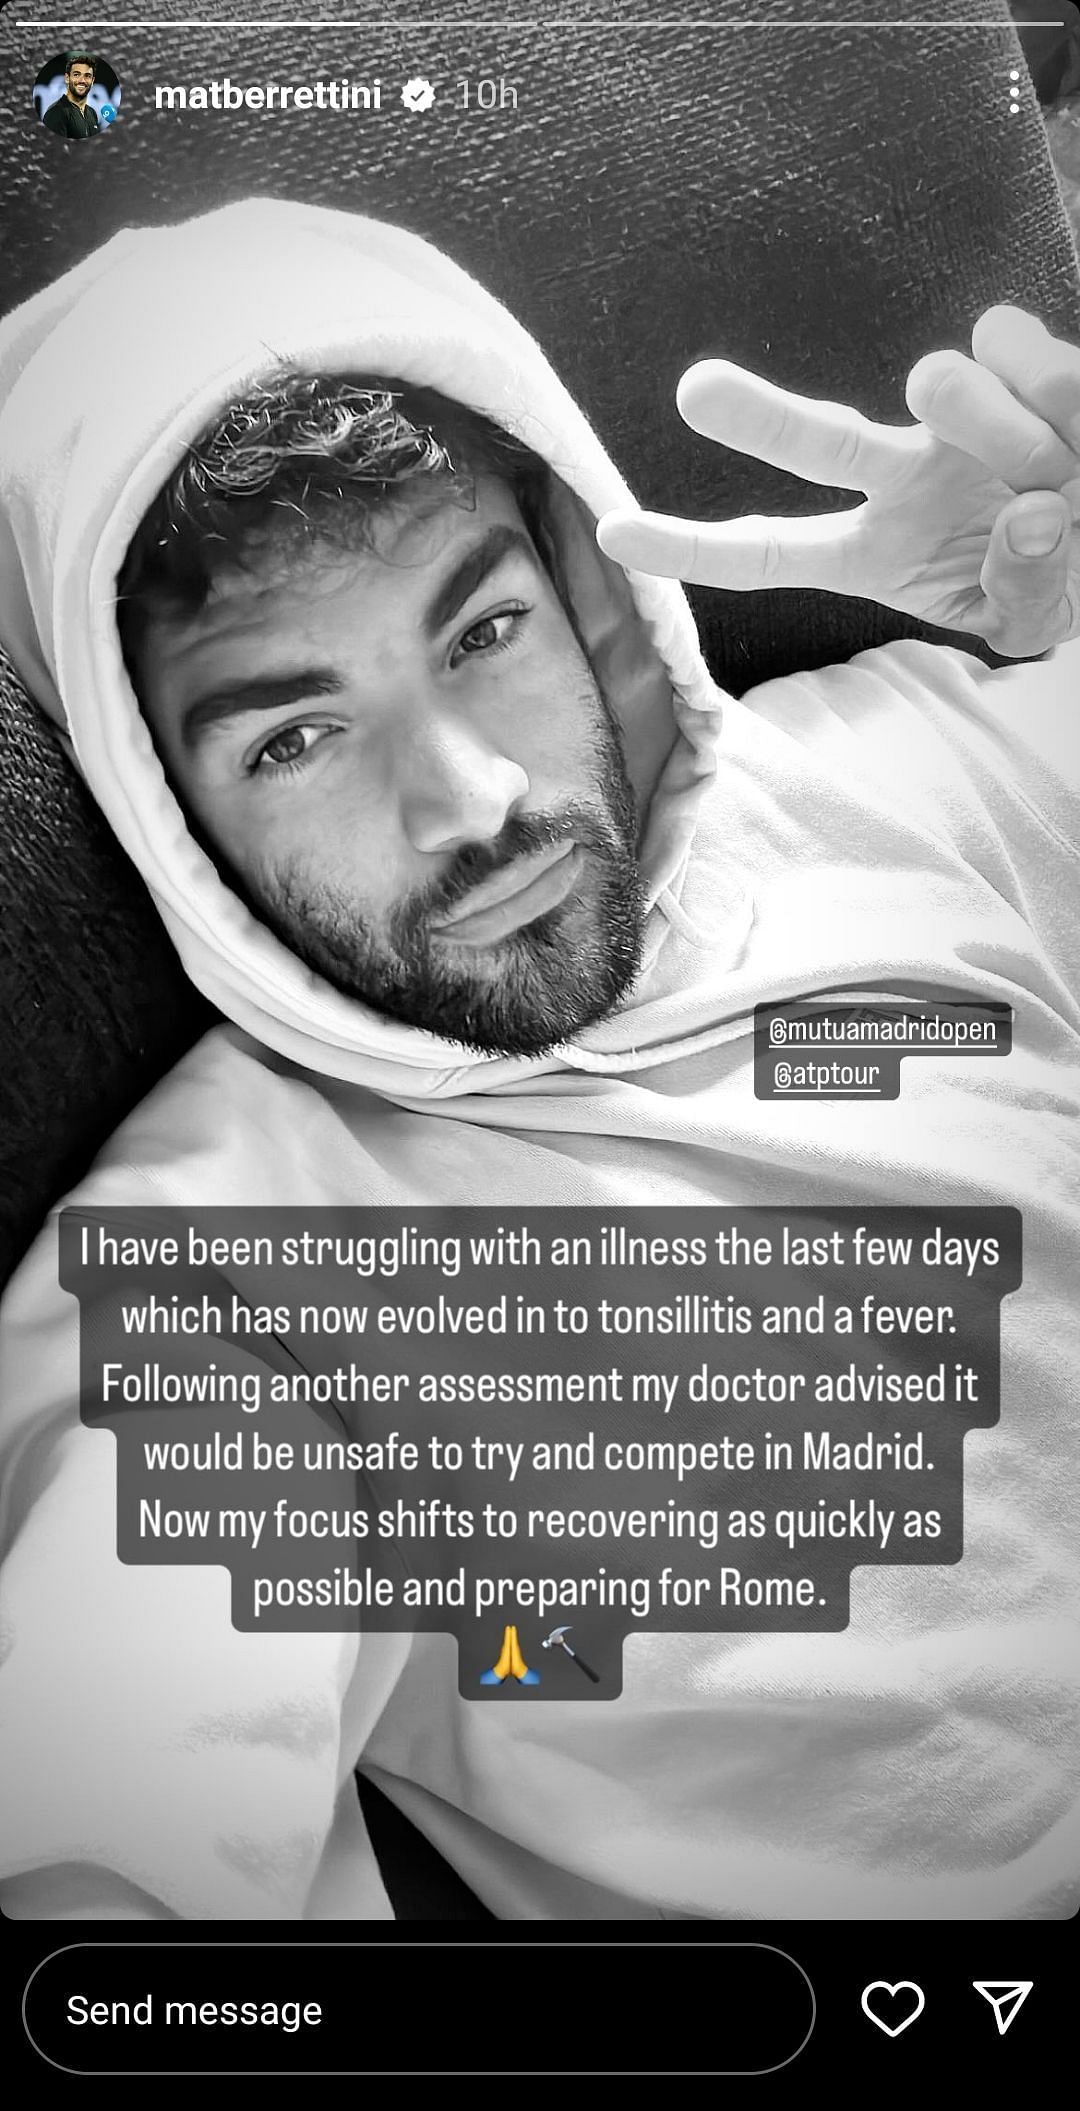 Matteo Berrettini&#039;s Instagram post announcing his withdrawal from the Mutua Madrid Open